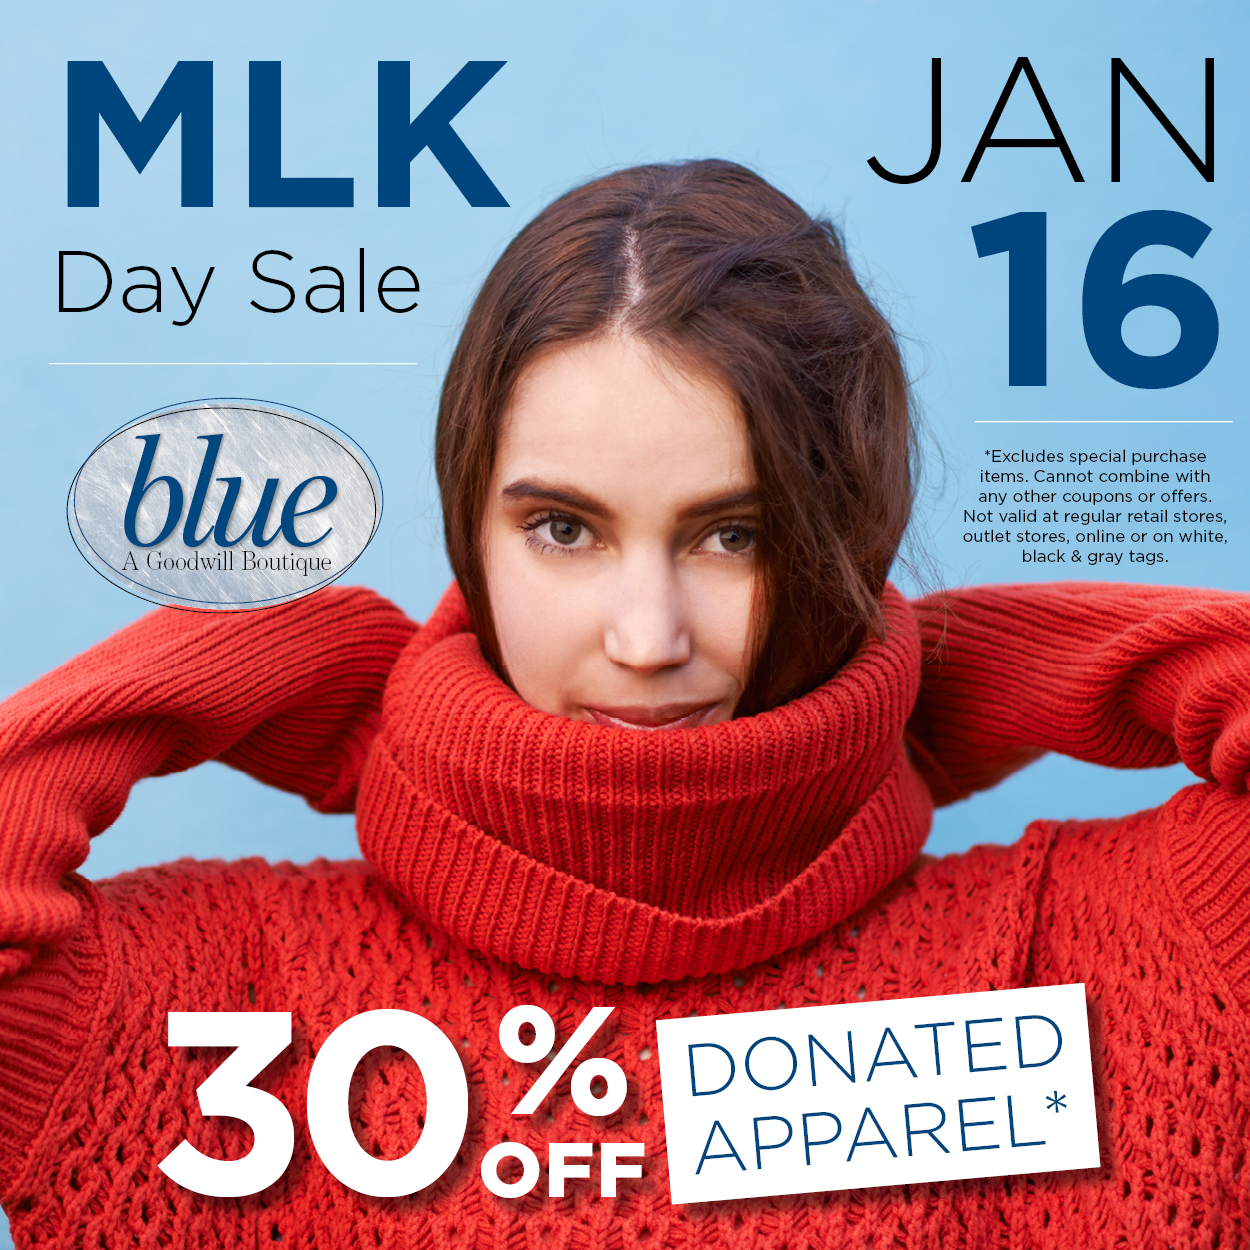 MLK Day Sale at blue boutiques 30% off donated apparel